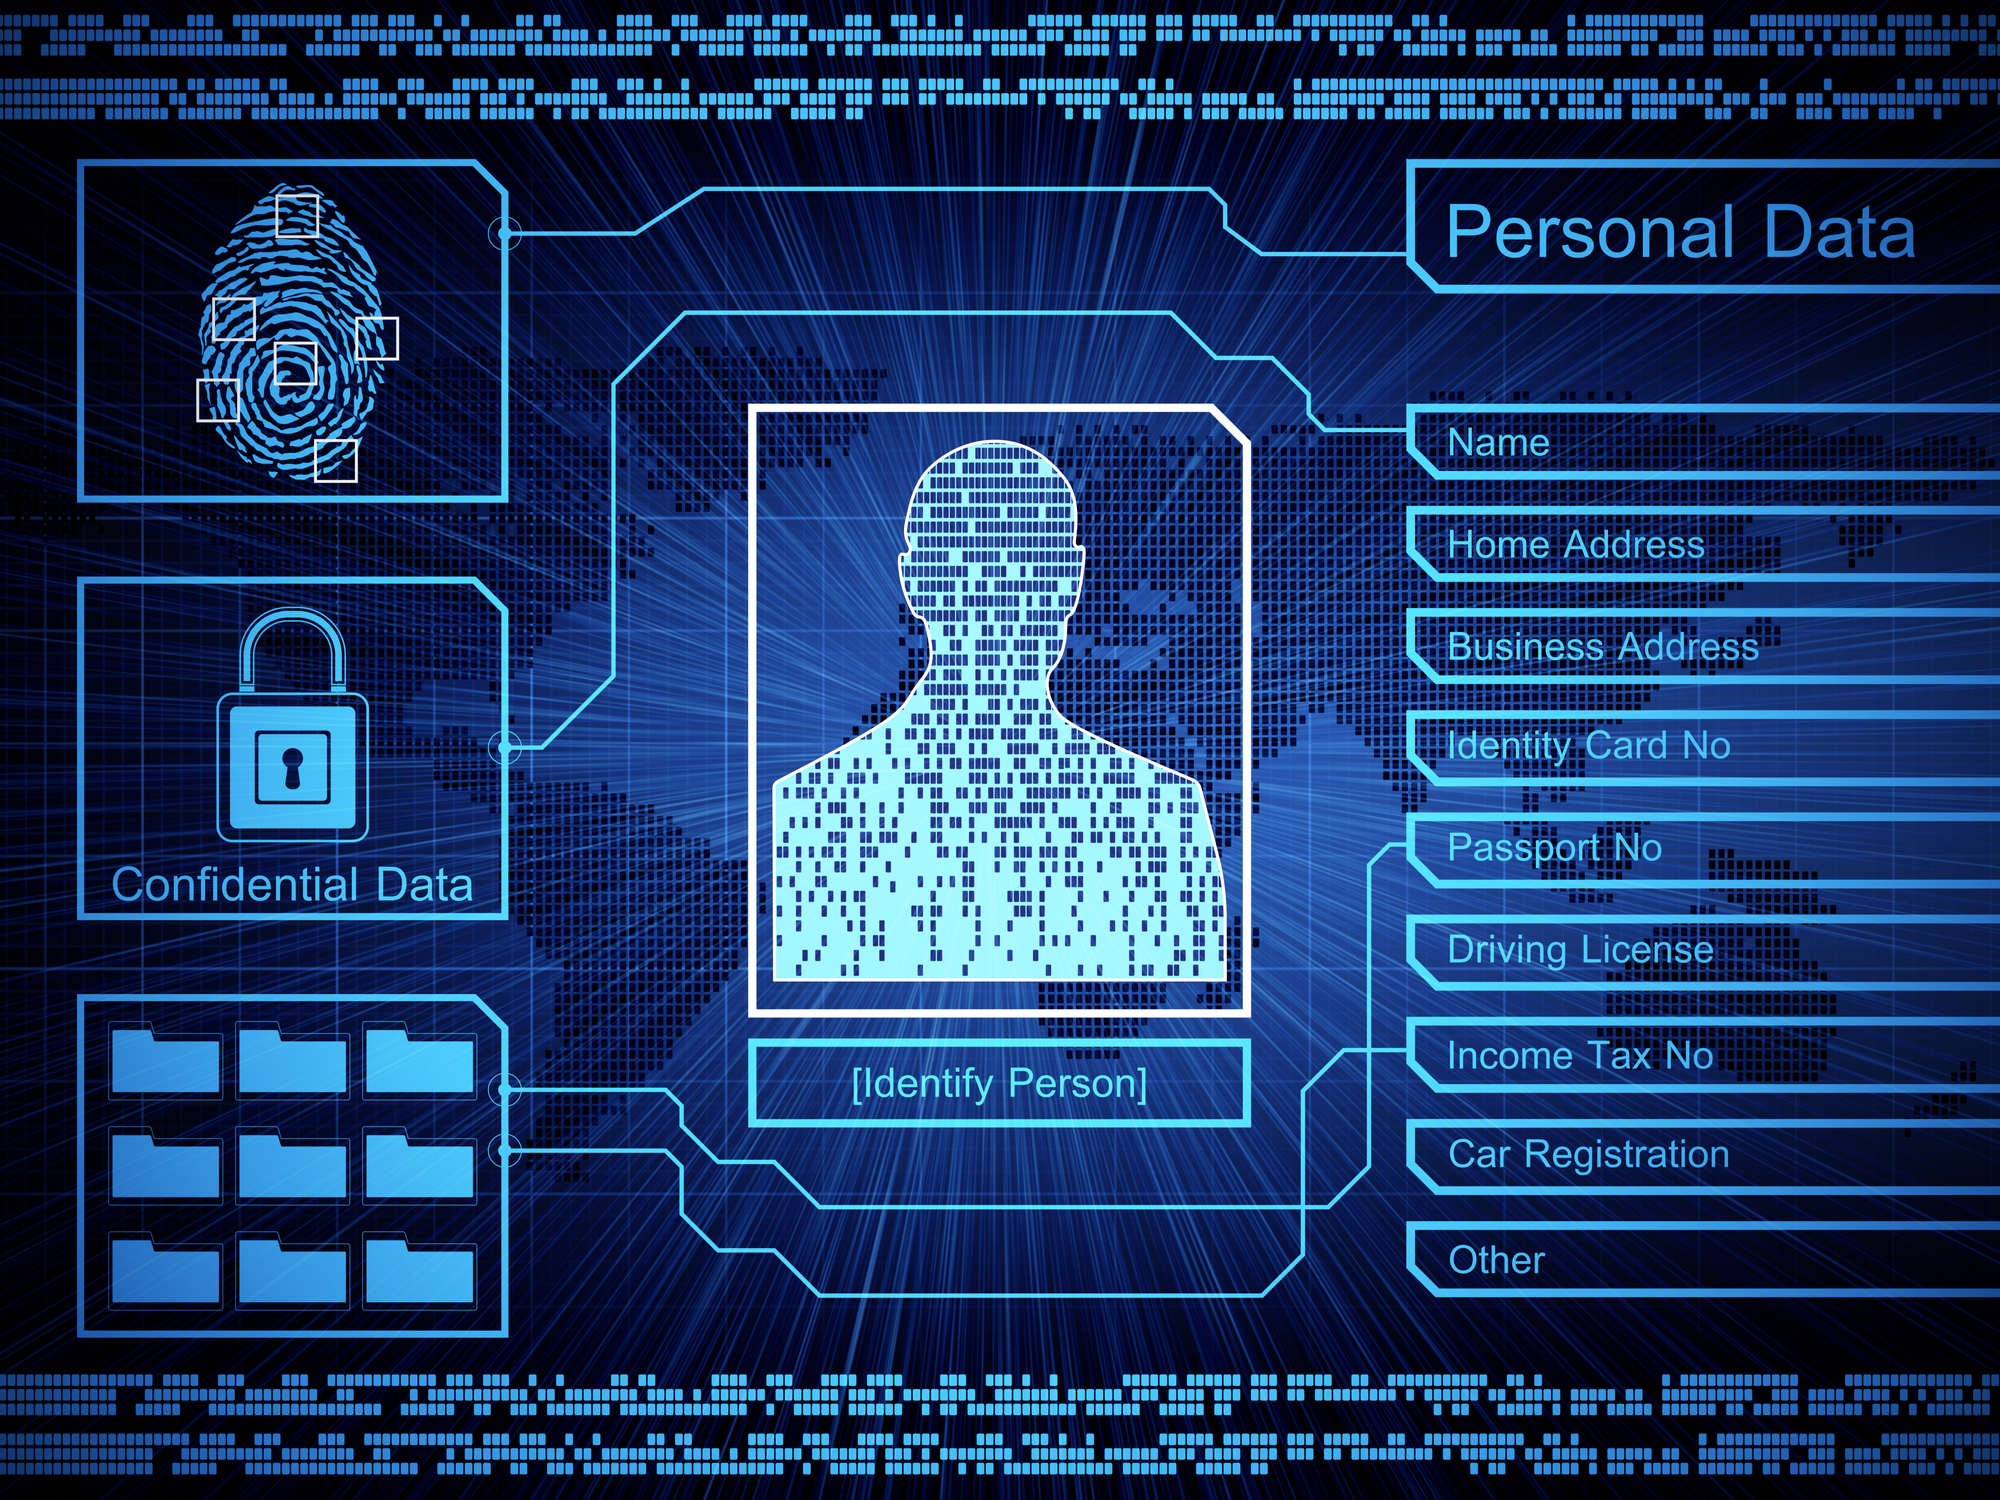 Computer screen with someone's personal information in text boxes around an image of a person